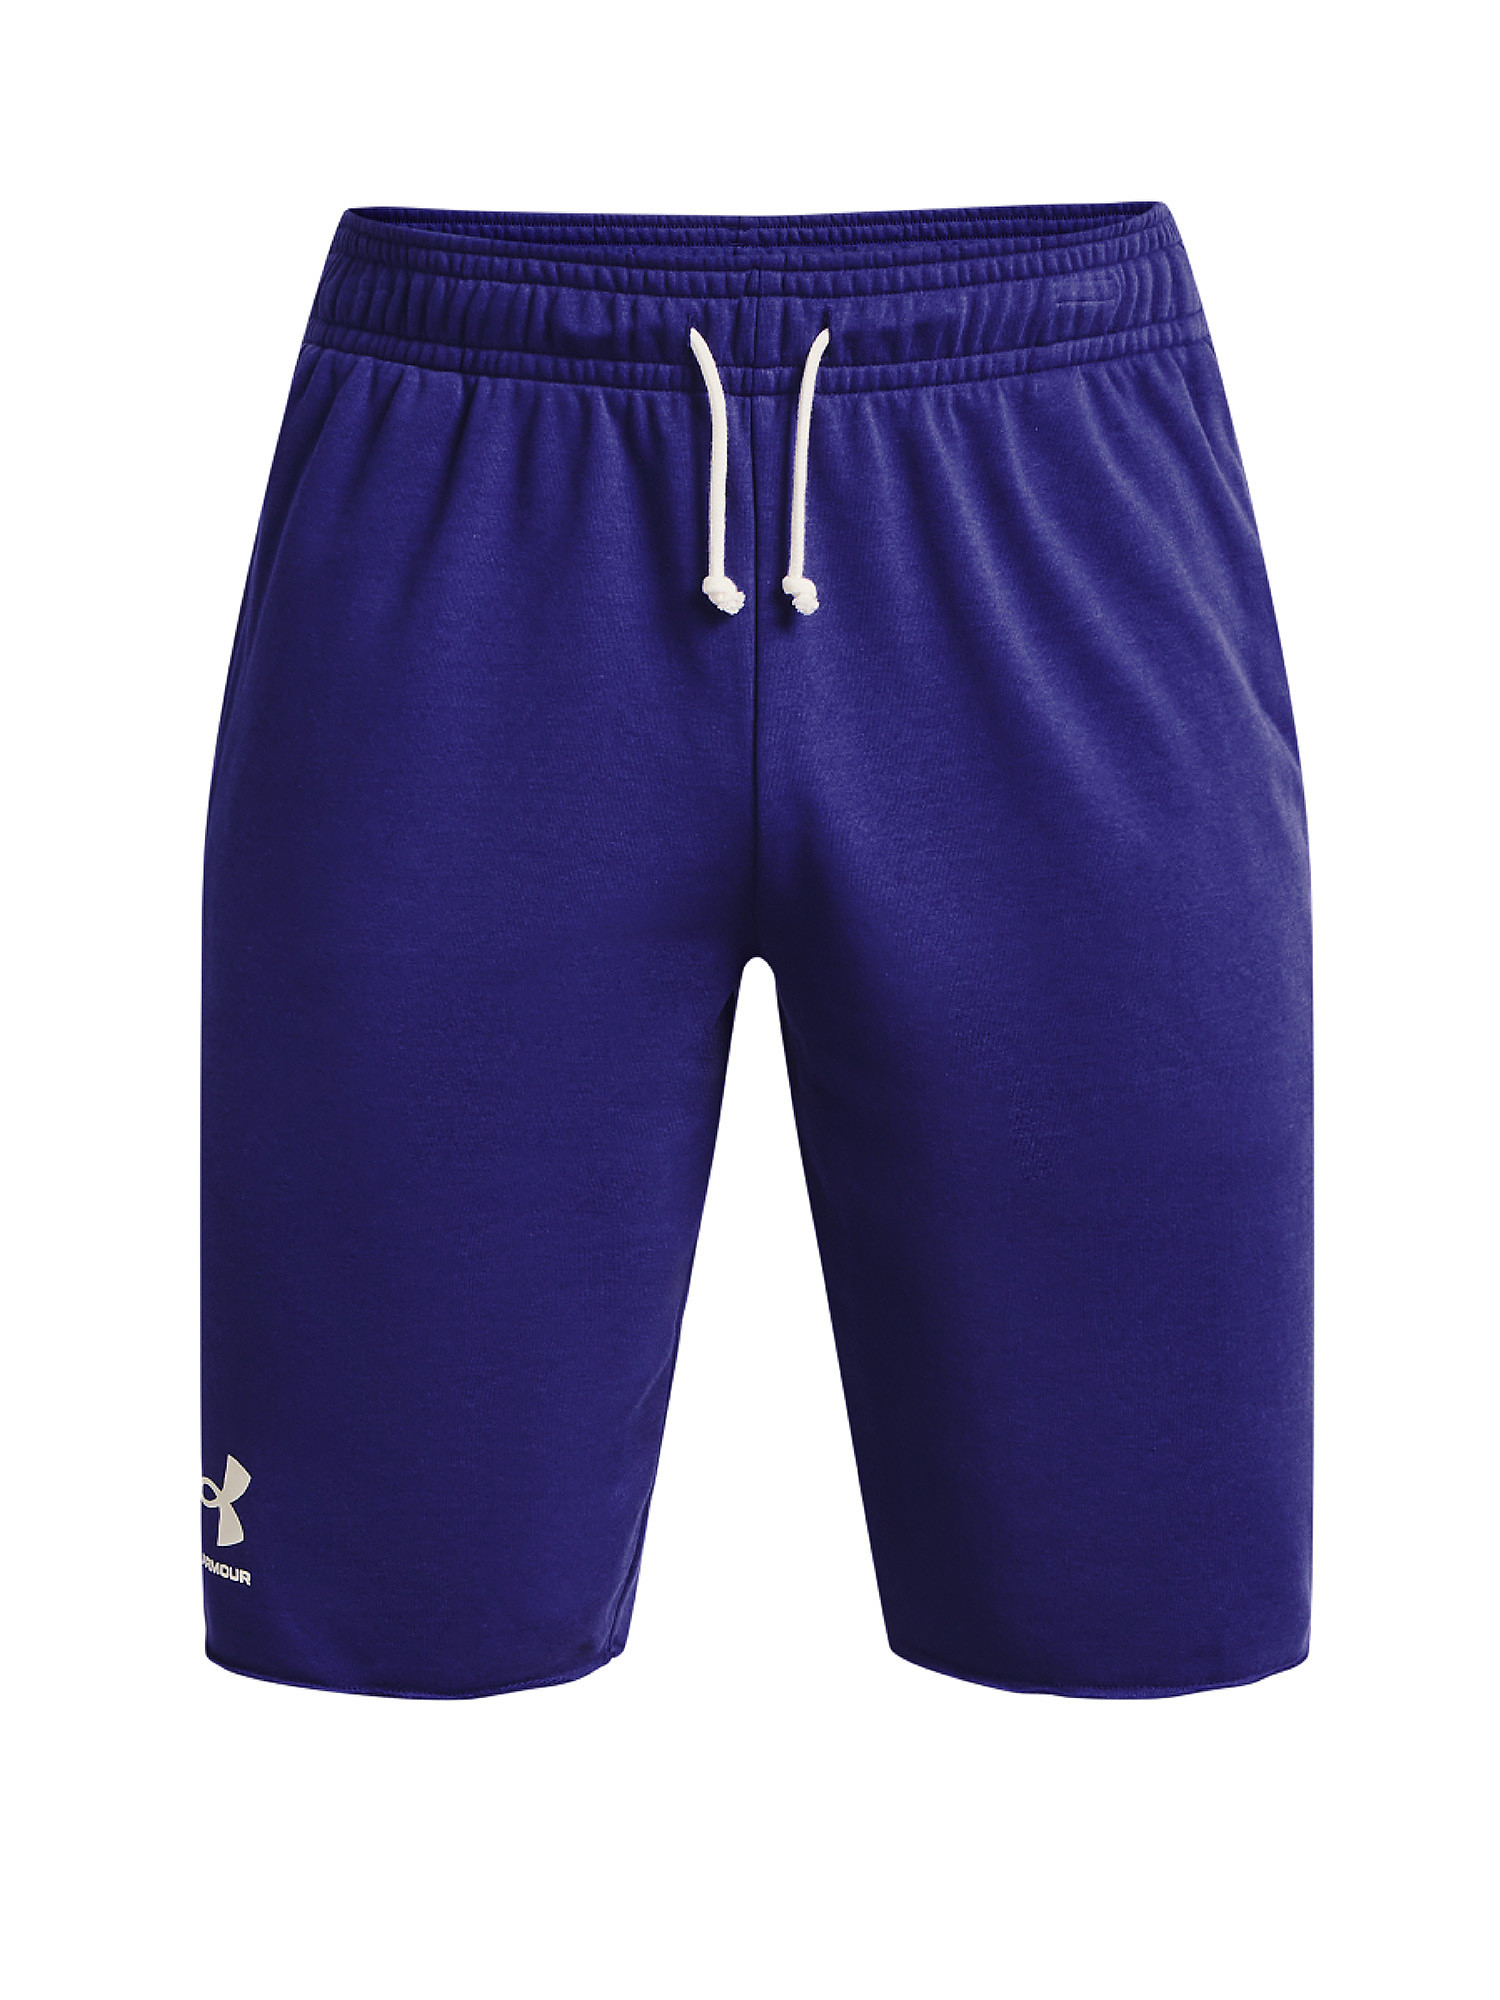 Under Armour - Shorts UA Rival Terry, Blu royal, large image number 0